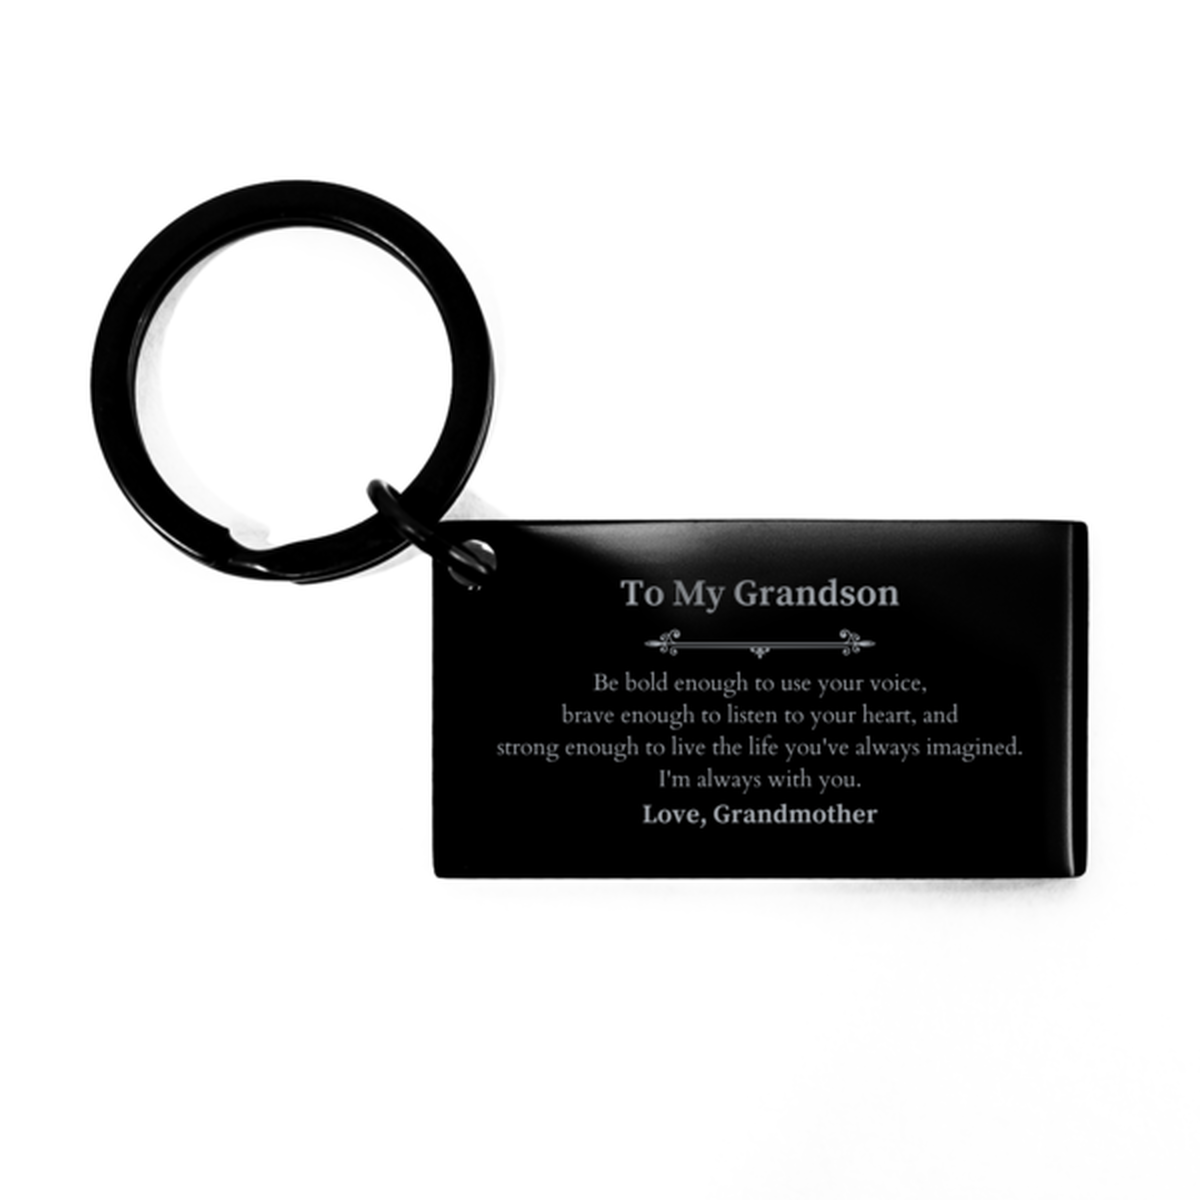 Keepsake Grandson Keychain Gift Idea Graduation Christmas Birthday Grandson from Grandmother, Grandson Be bold enough to use your voice, brave enough to listen to your heart. Love, Grandmother